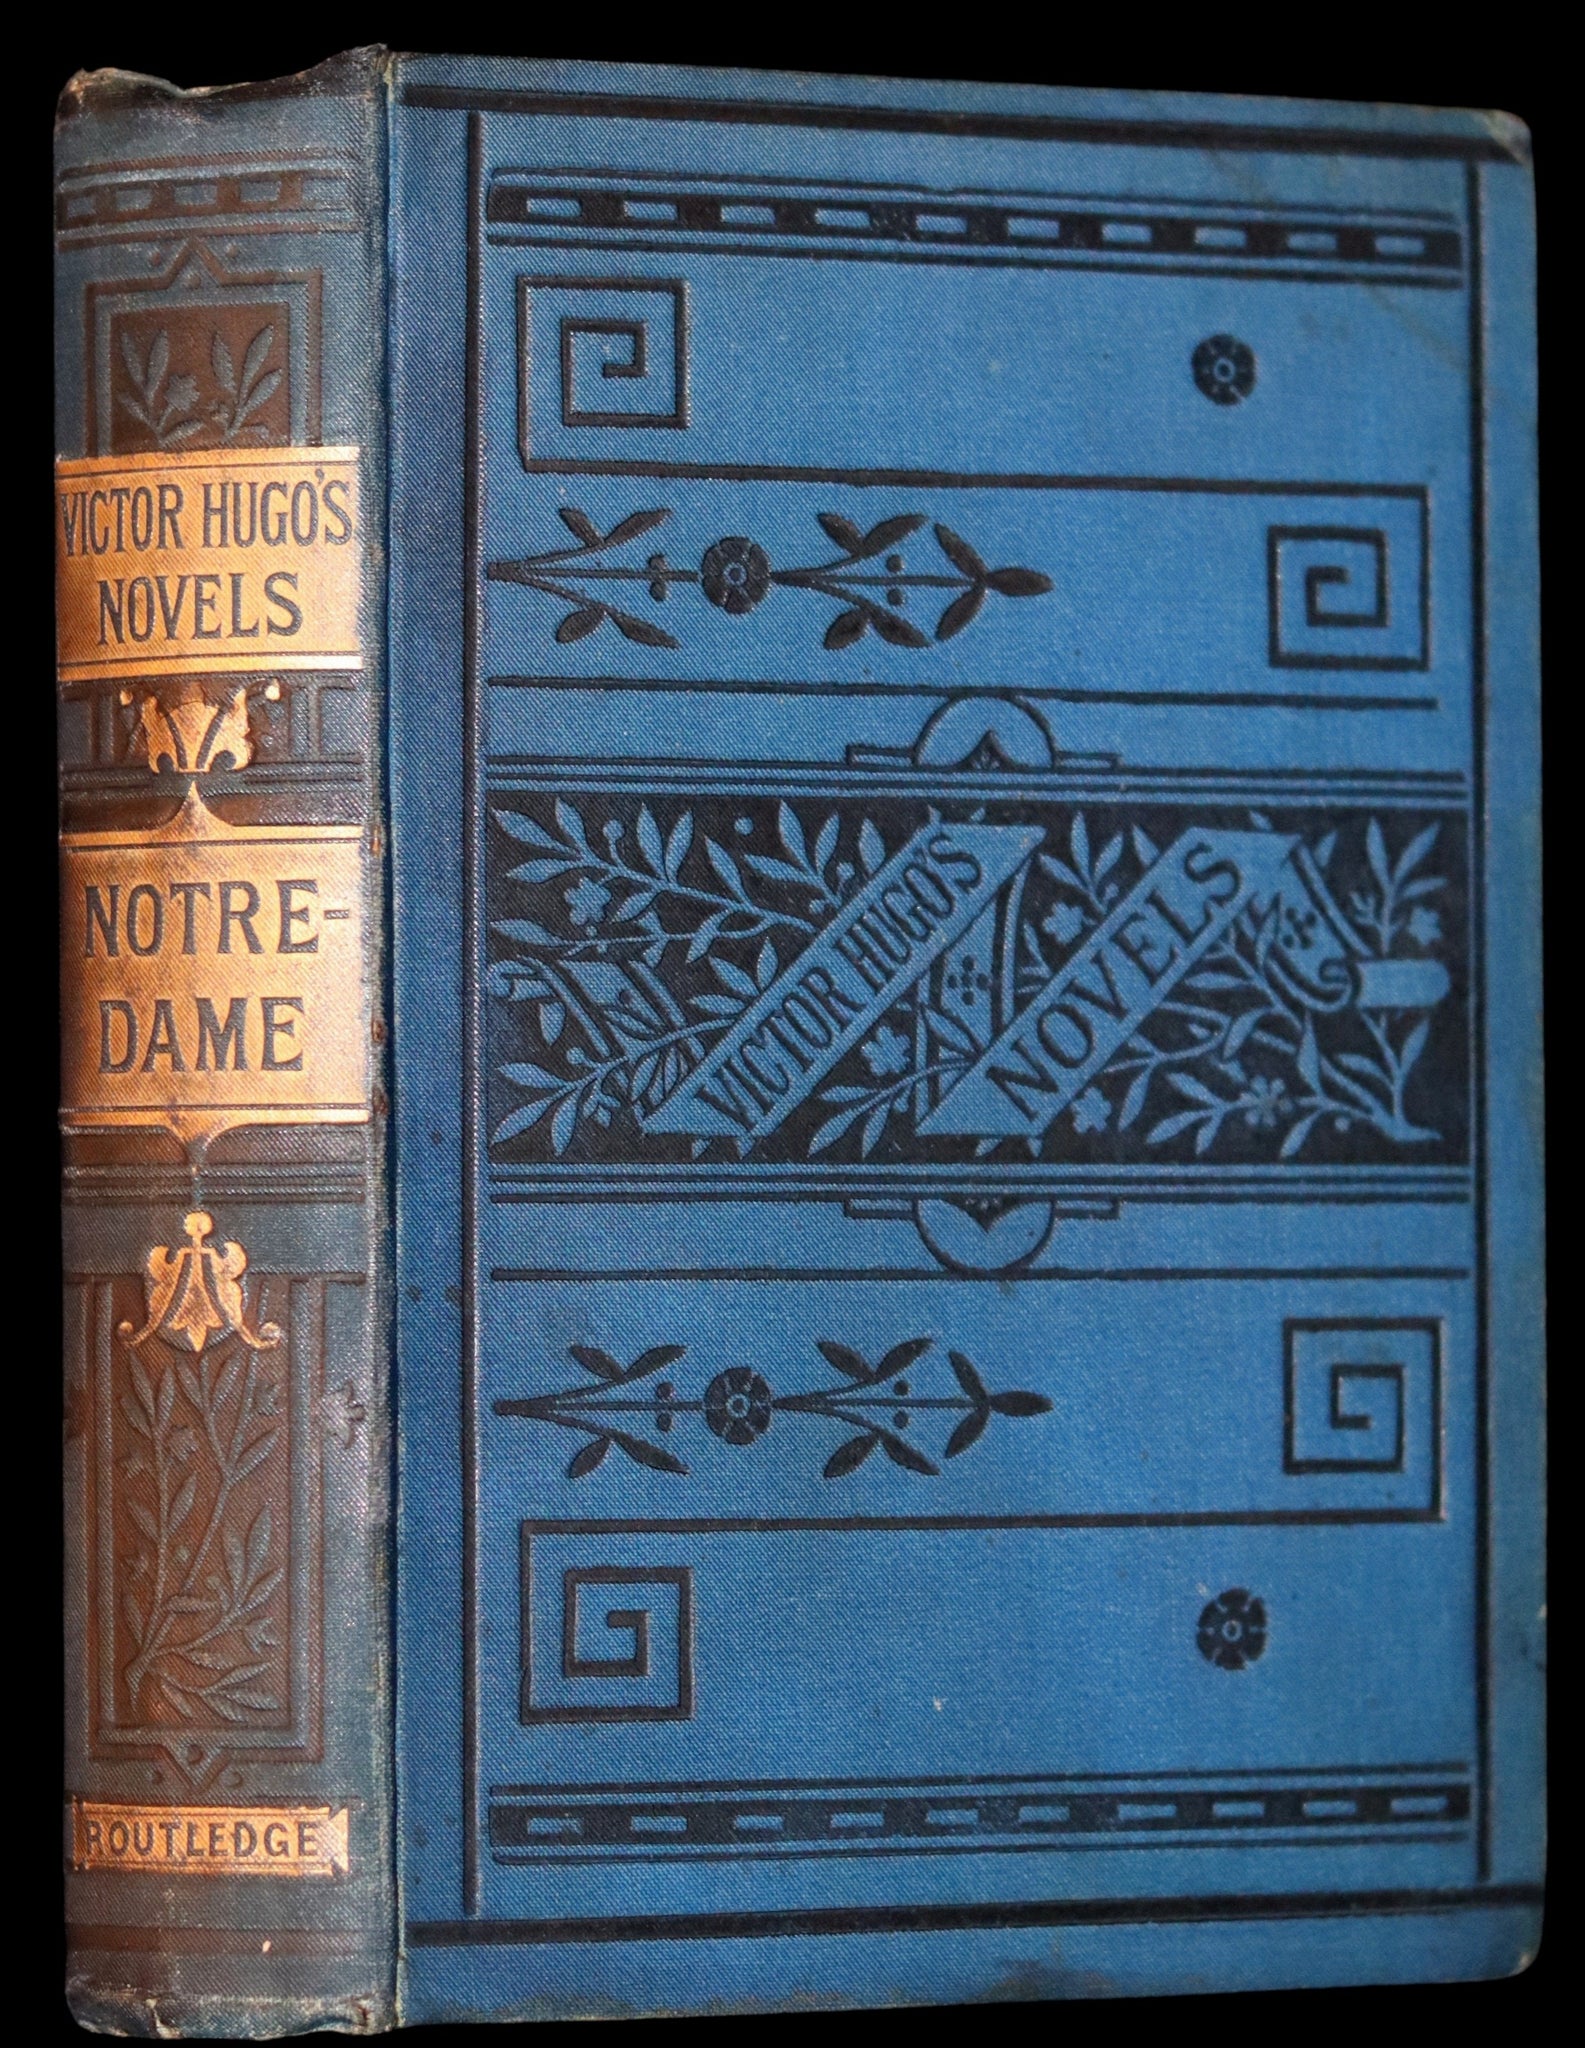 1890 Rare Victorian Gothic Book - Notre-Dame or The Bellringer of Paris by Victor Hugo.